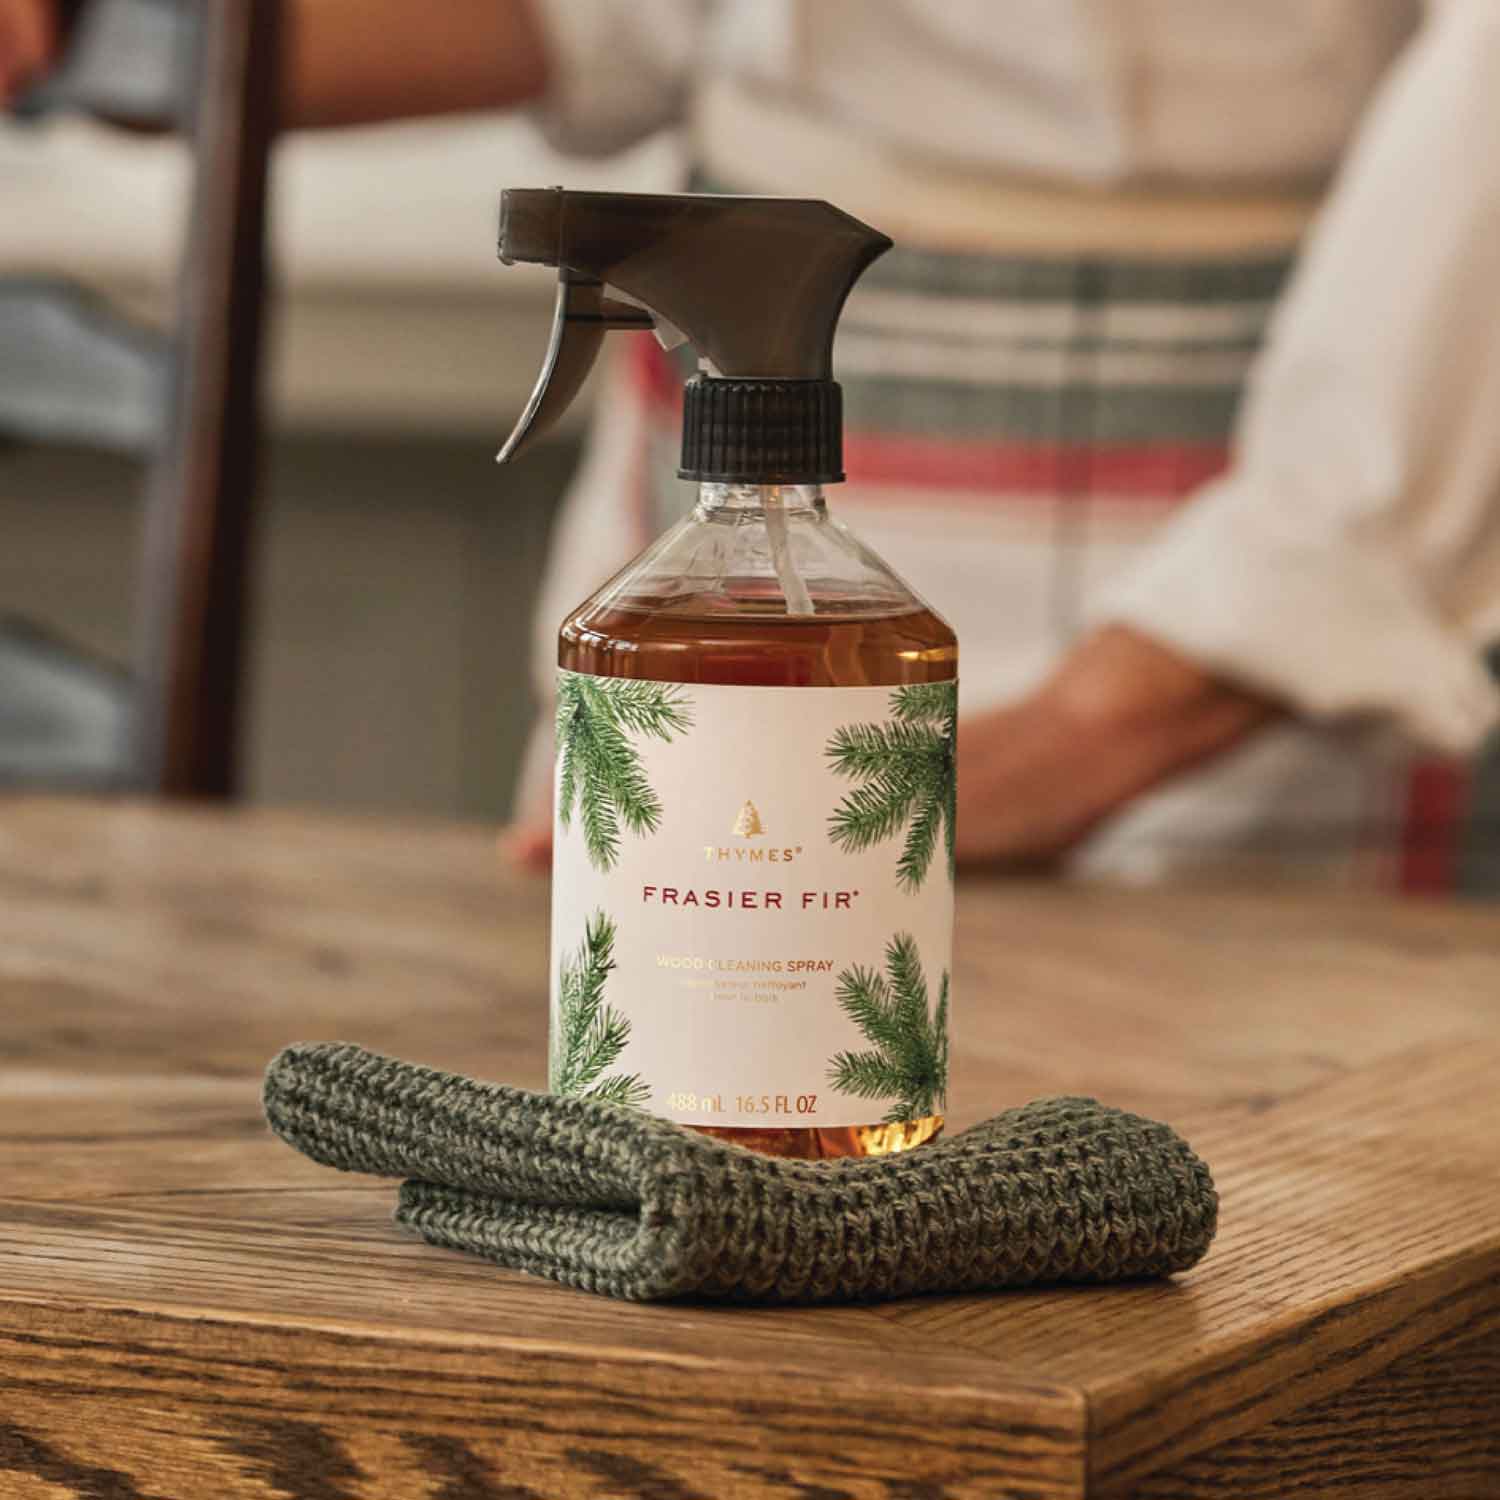 Thymes Frasier Fir Heritage Hand Wash Refill | Hand Care